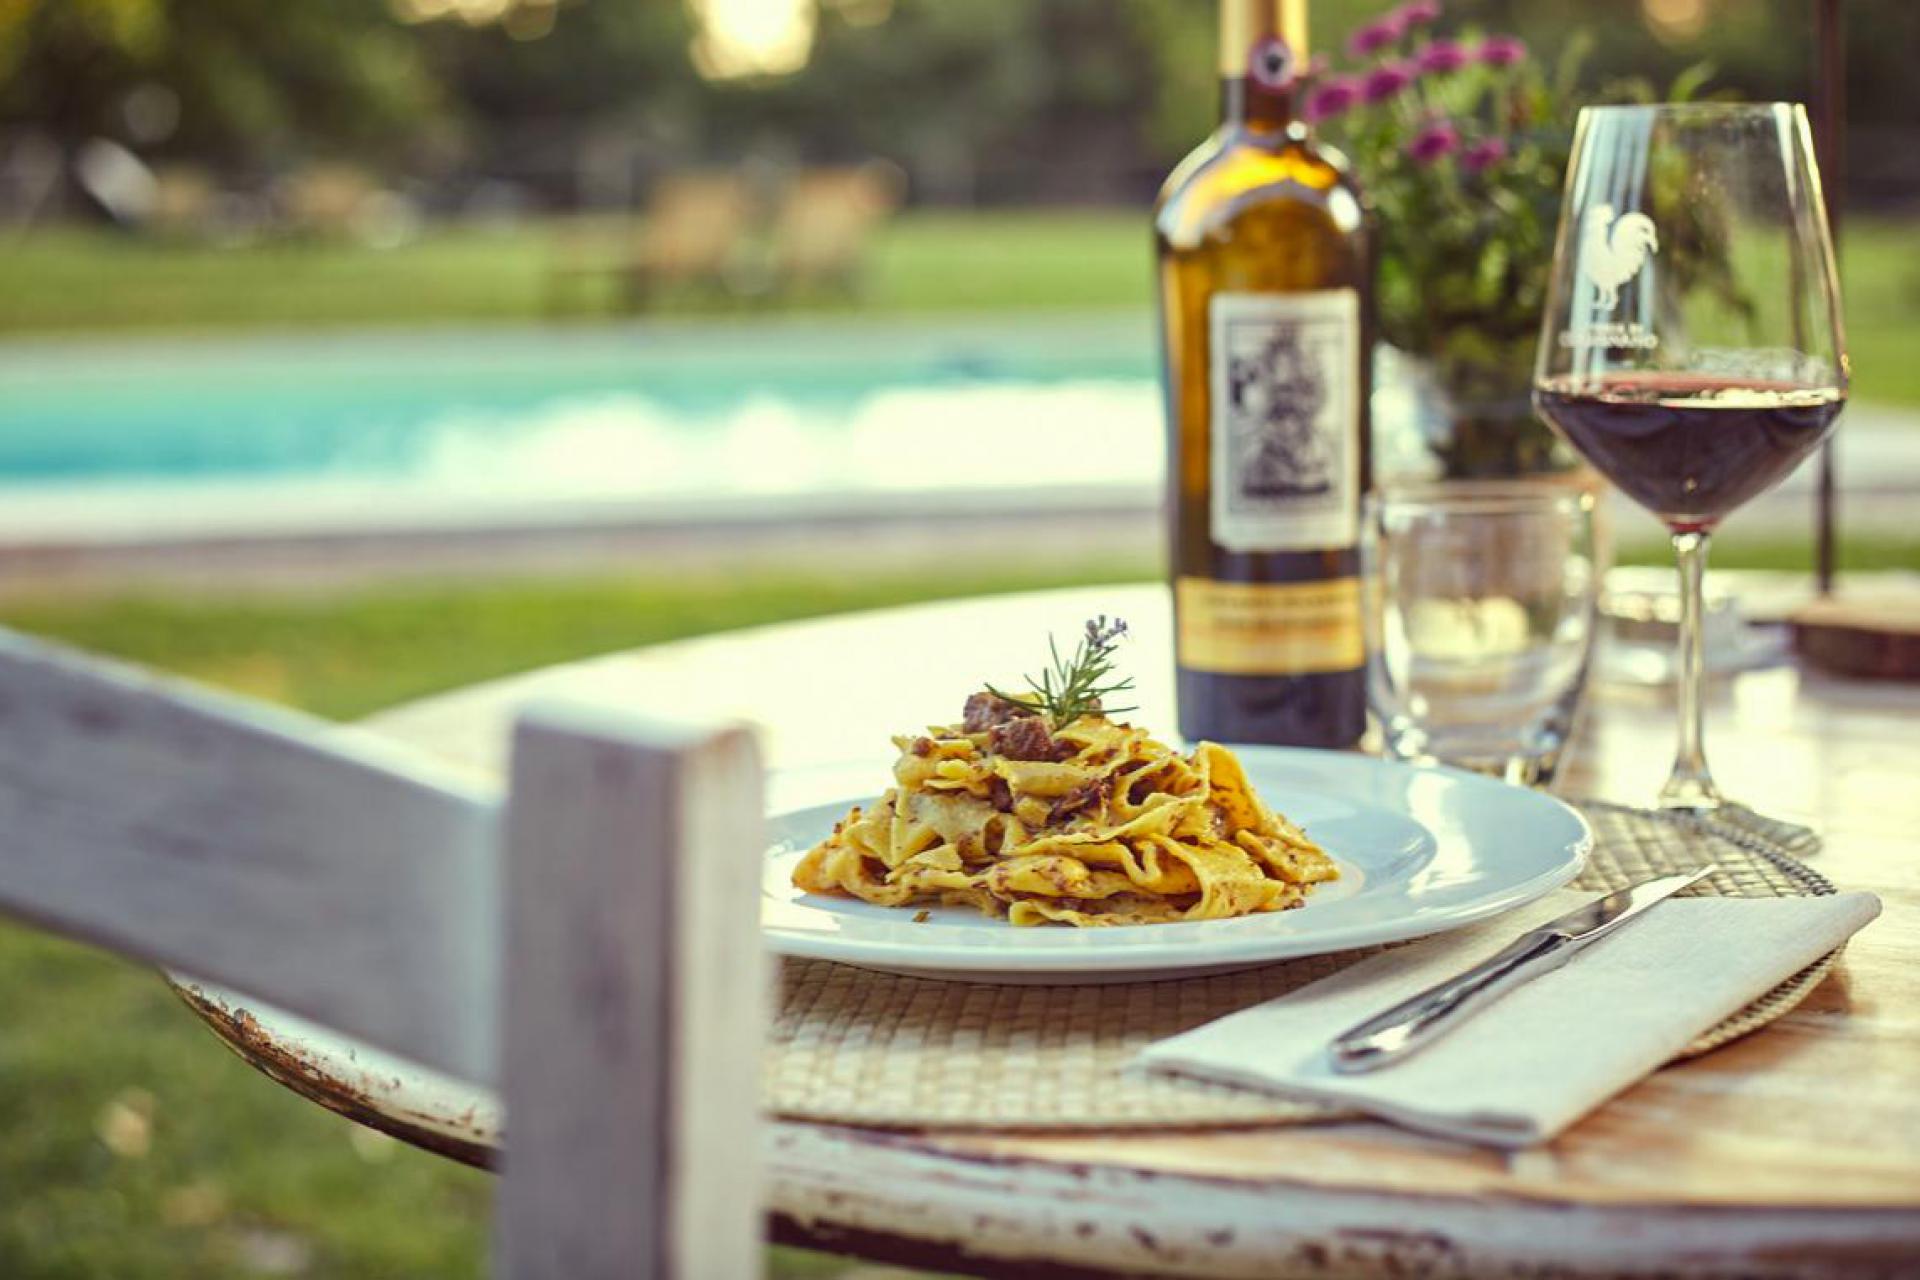 Authentic agriturismo and winery in Chianti, Tuscany